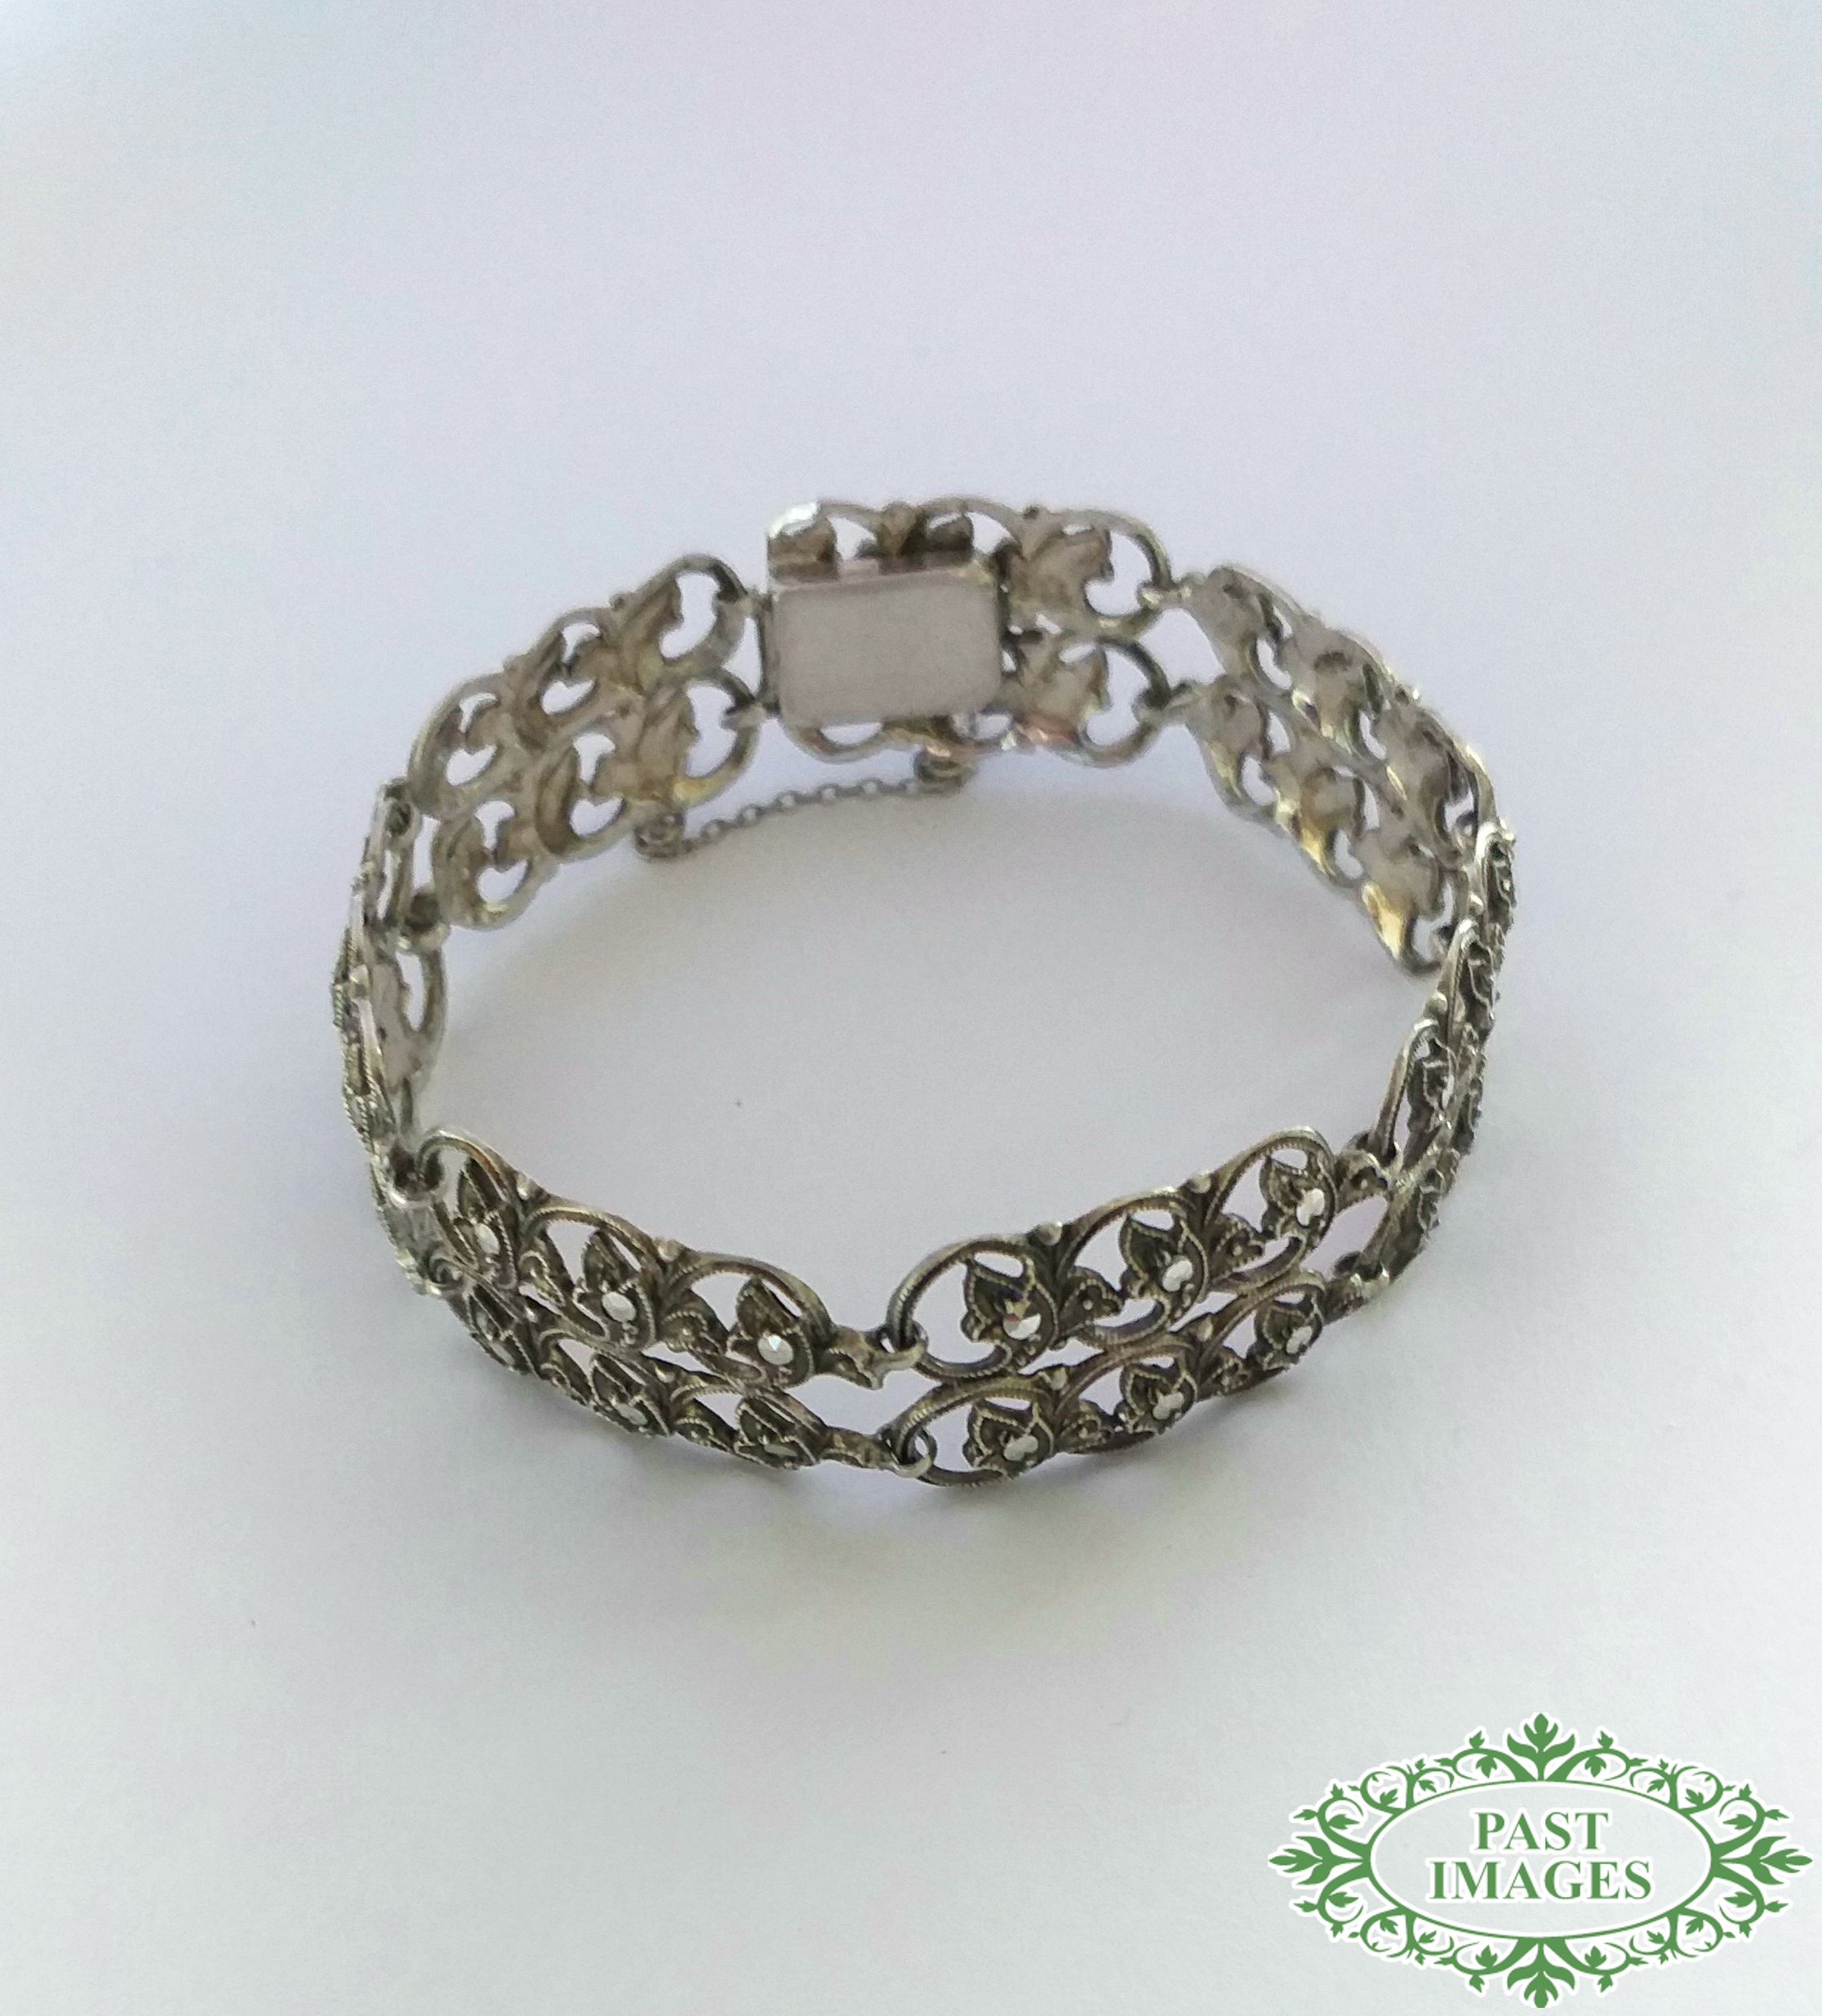 SOLD – A 935 Silver and Marcasite Bracelet – 17cm – Past Images